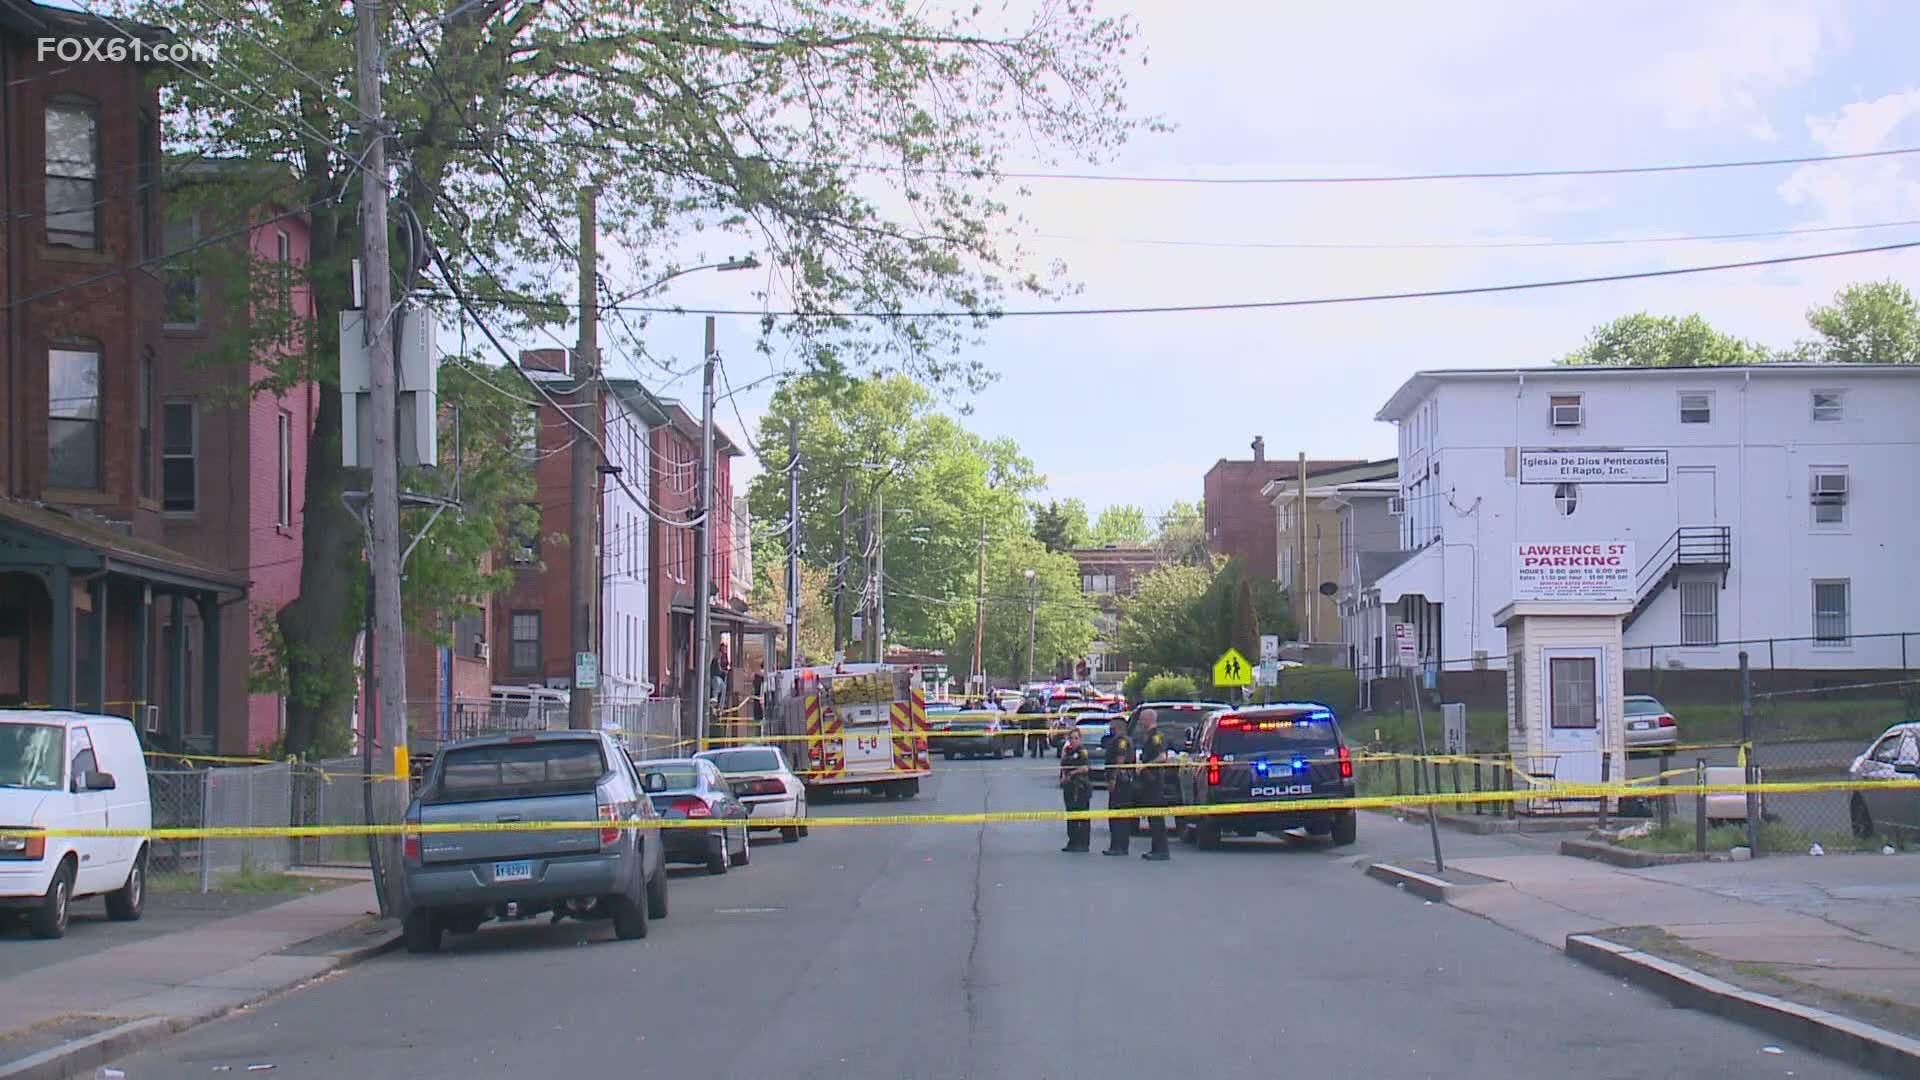 Four shootings happened over the weekend that left five people injured, one critically.